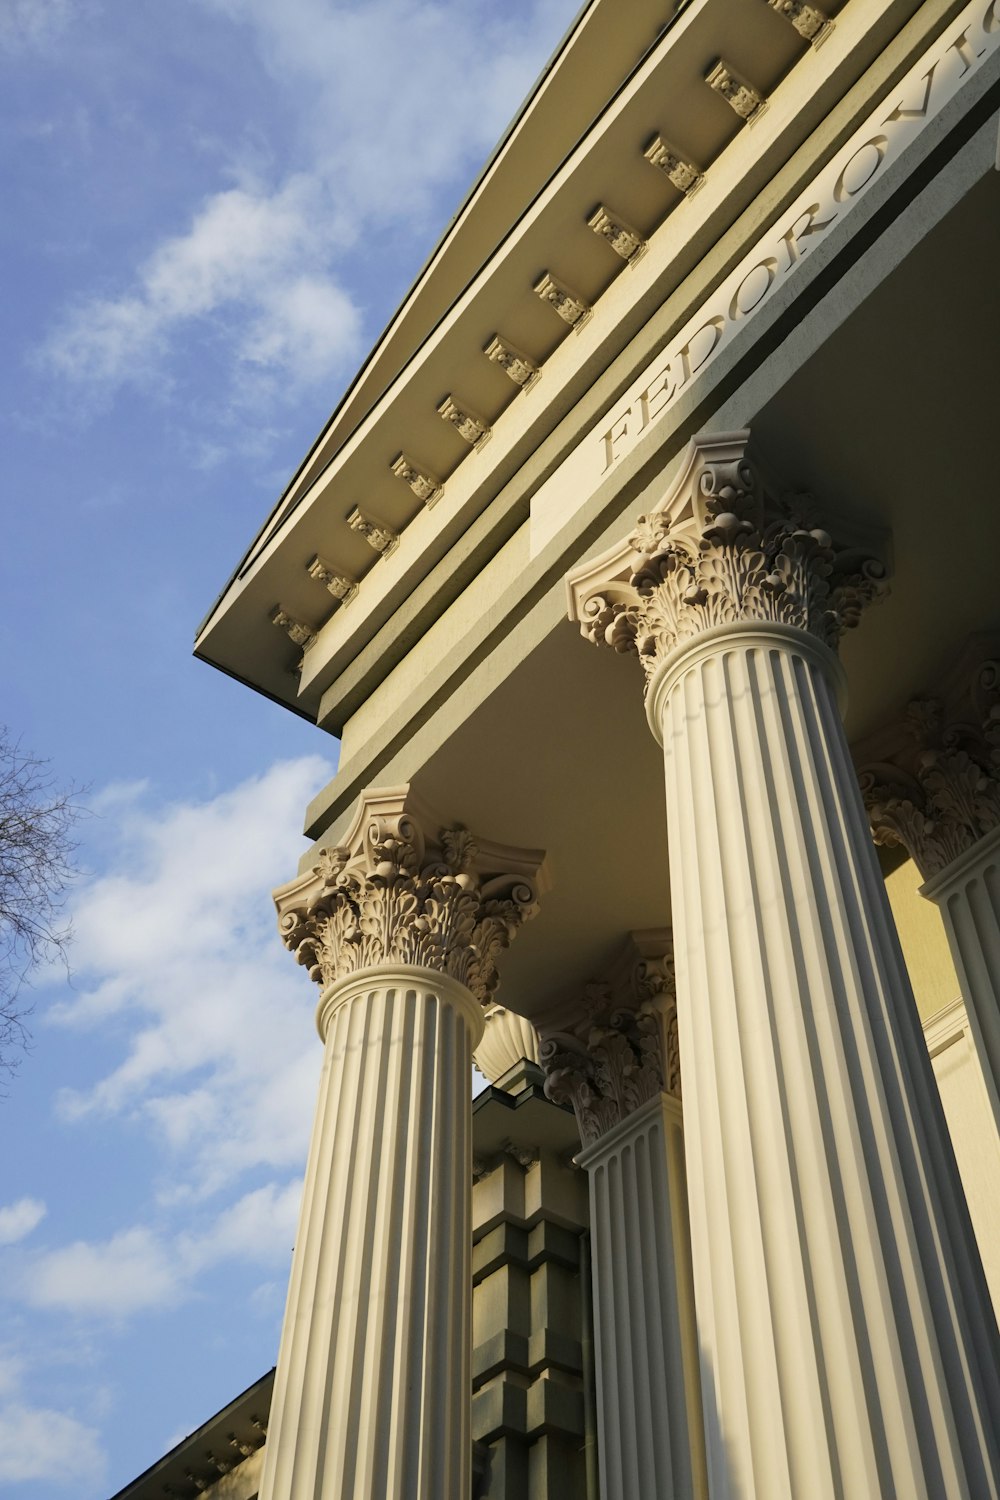 a close up of the columns of a building